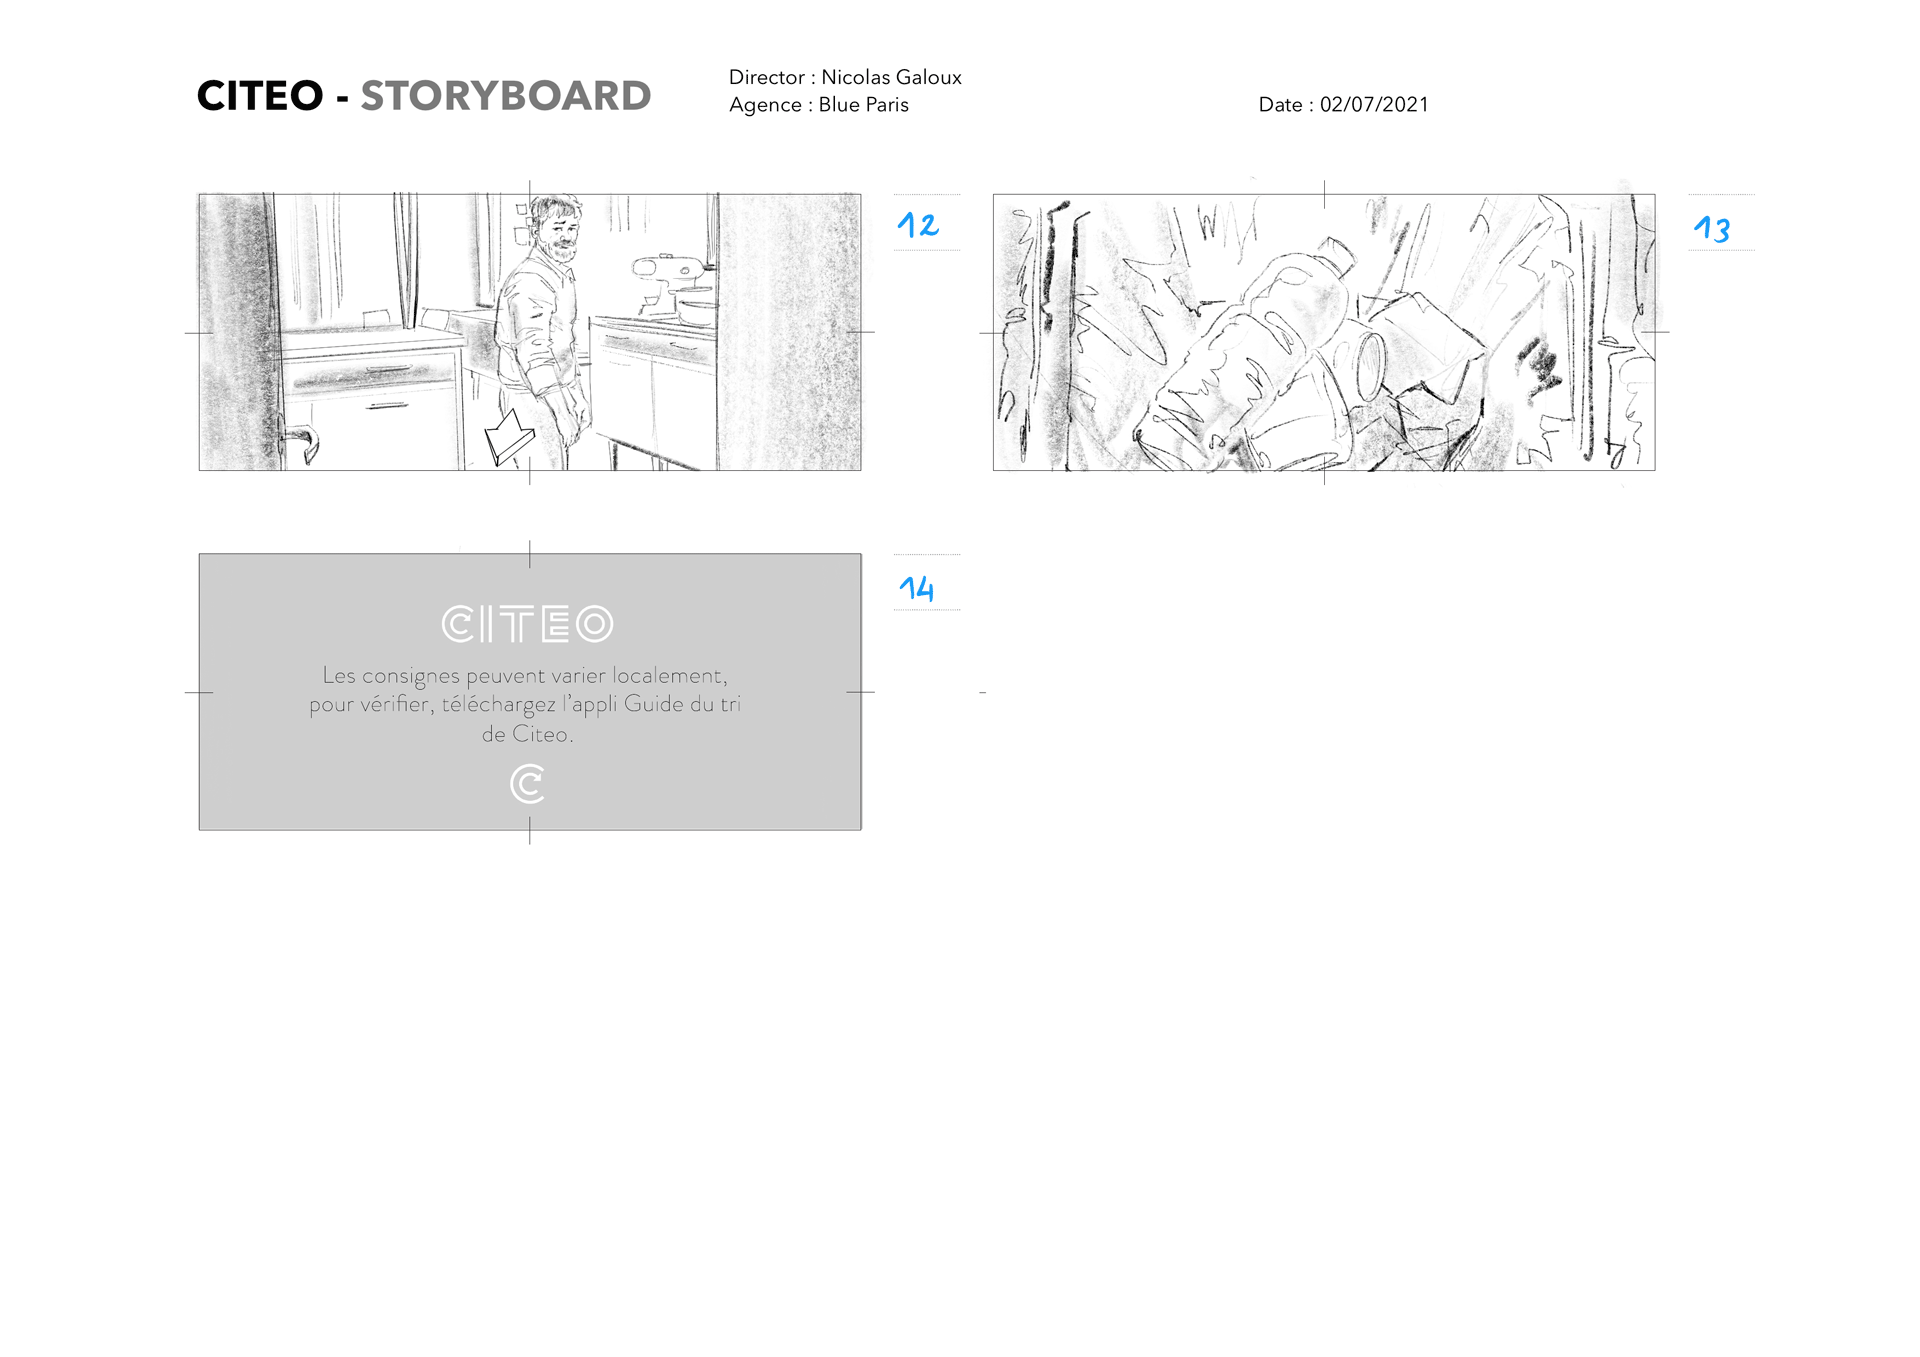 Citeo, storyboard, page 03